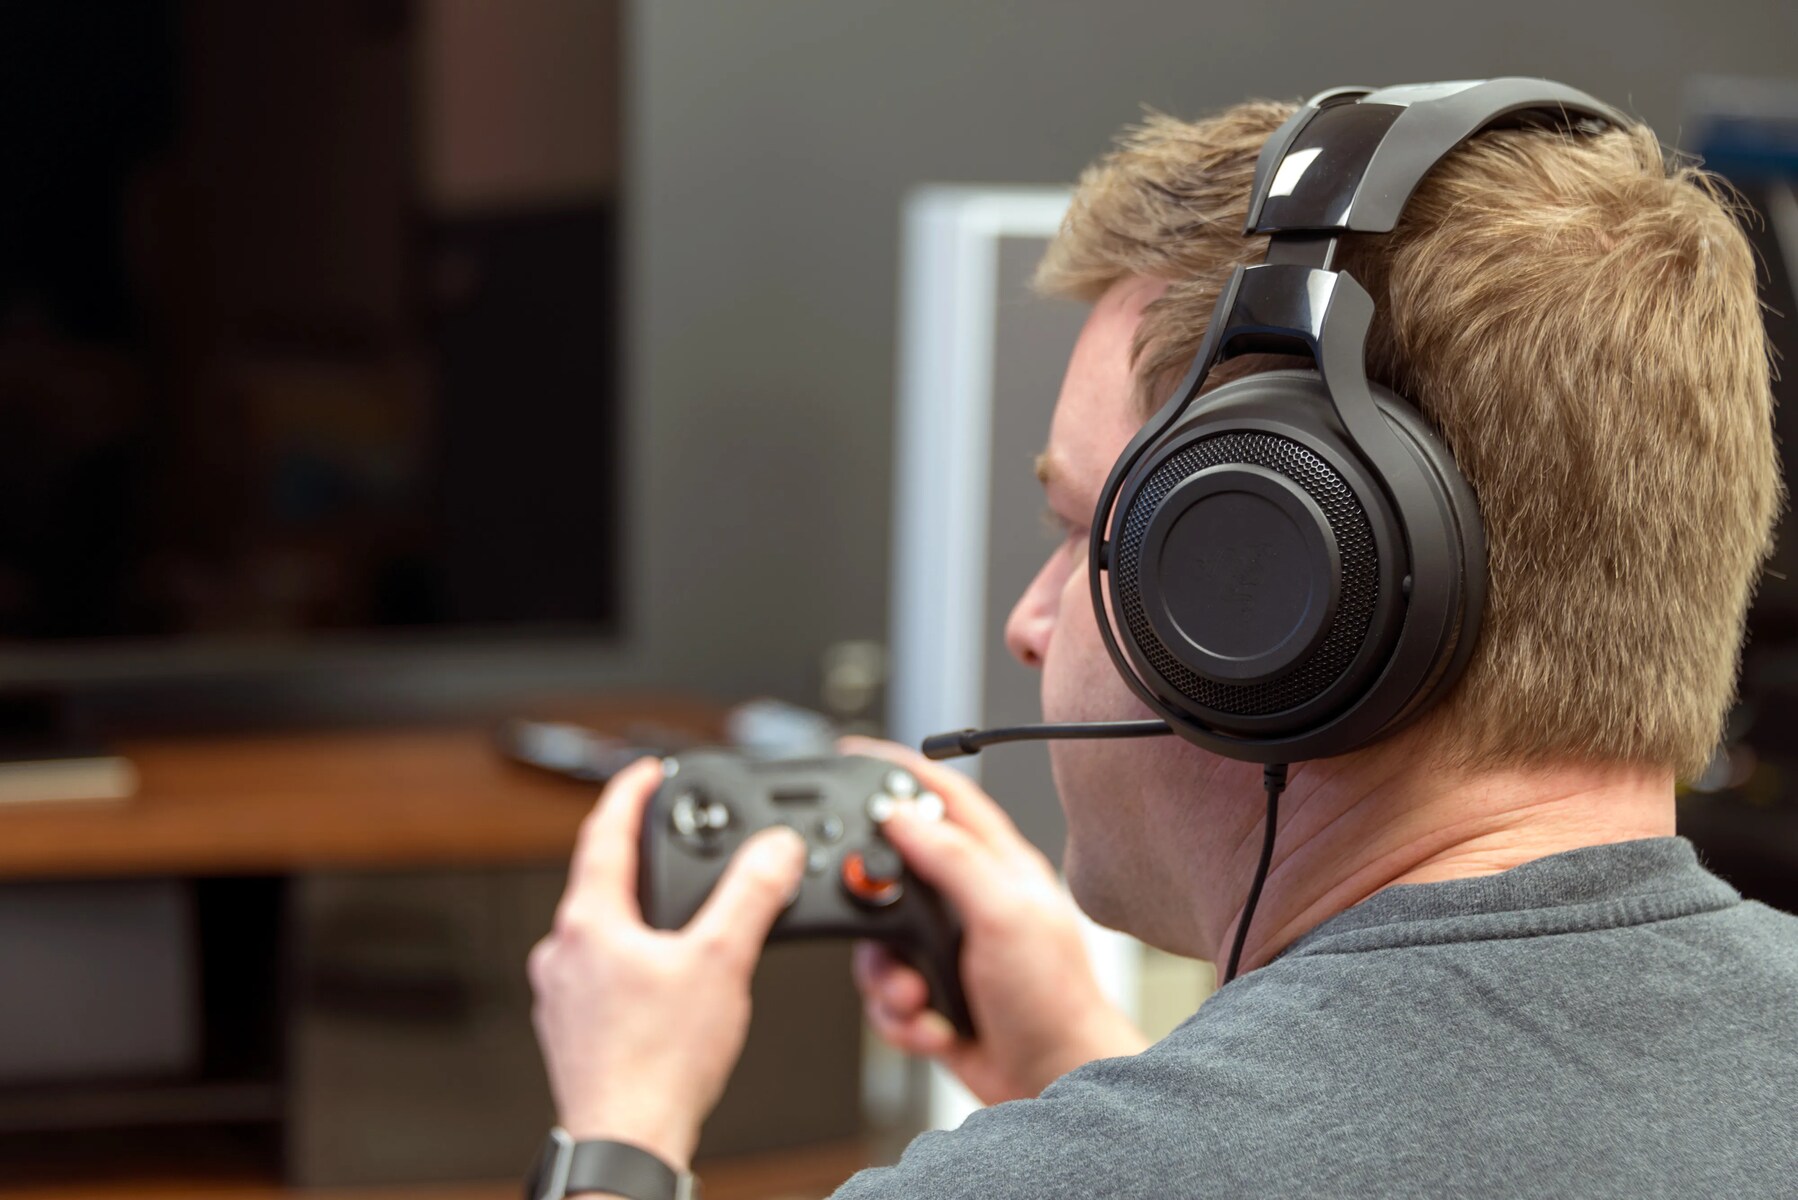 Man O War PC Gaming Headset 7.1 Wired: How To Use It With PC